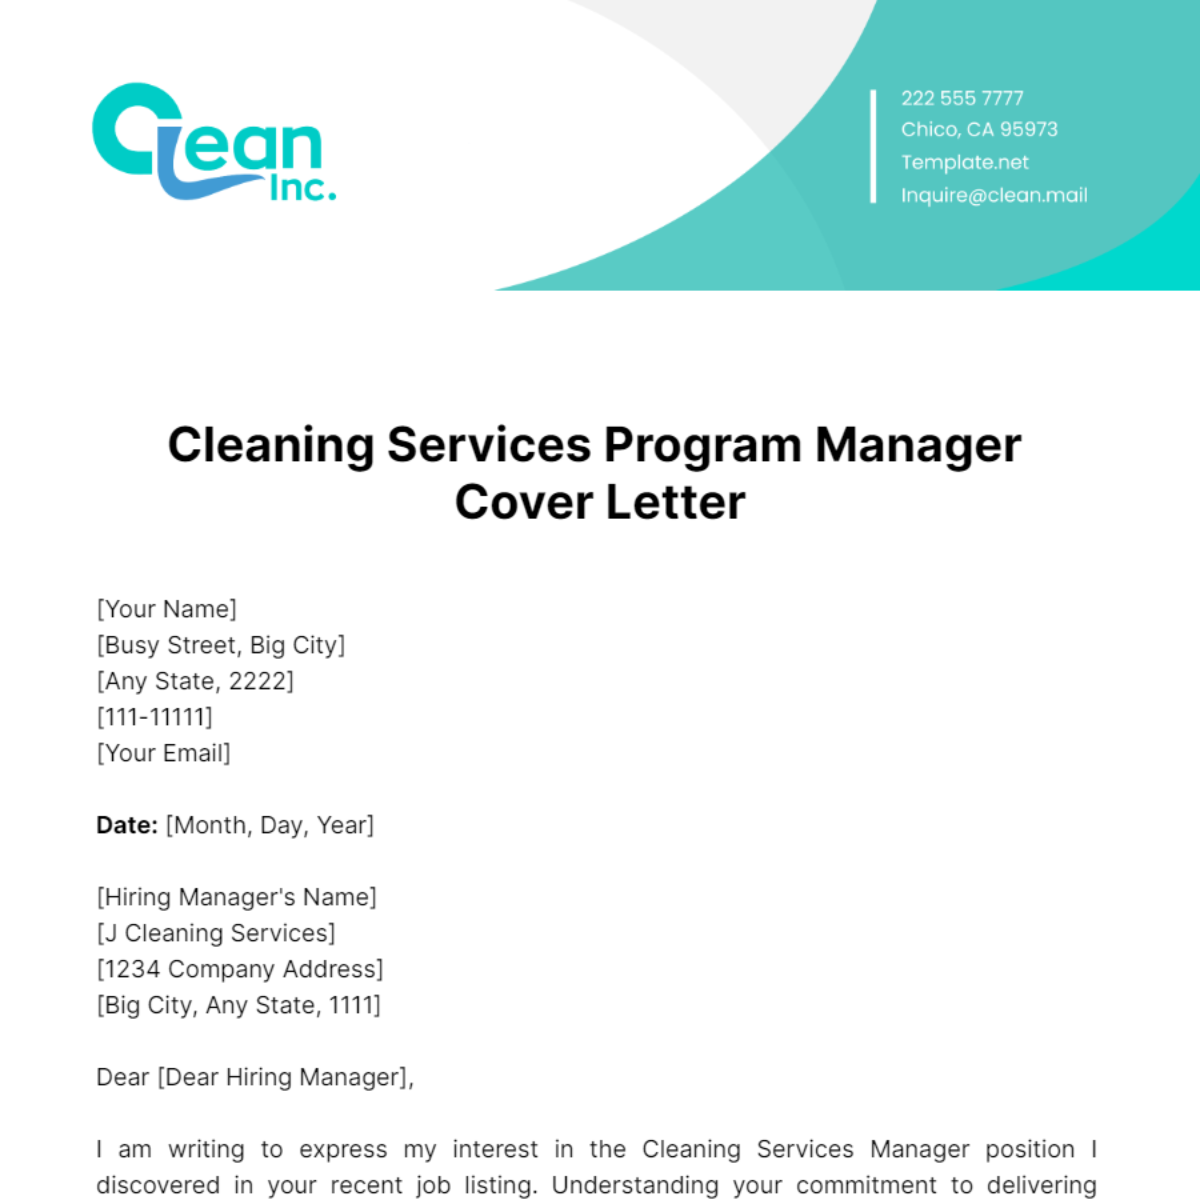 Cleaning Services Program Manager Cover Letter Template